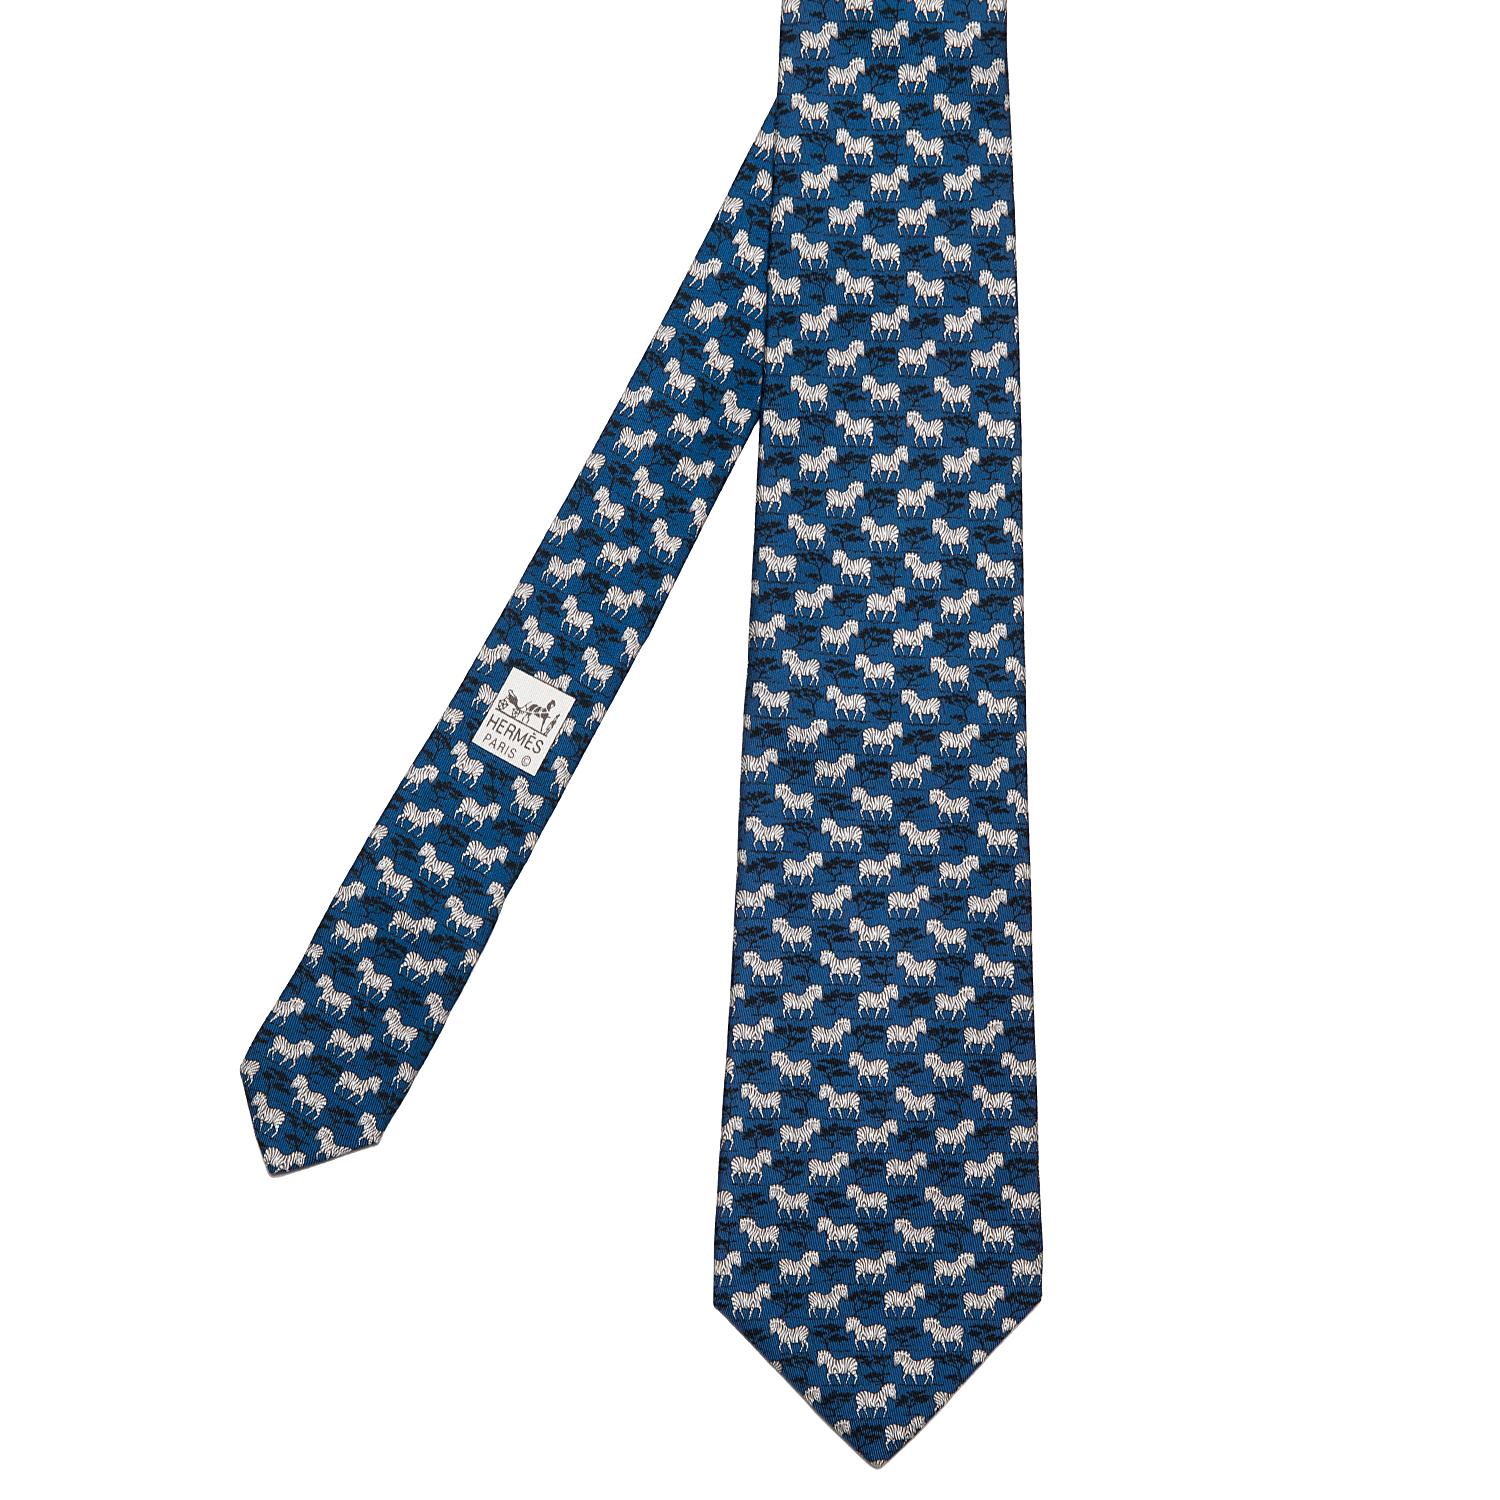 This delightful, Whimsical, Vintage Hermes Silk Tie, 'Zebra's' is in pristine condition and on a dark blue ground.